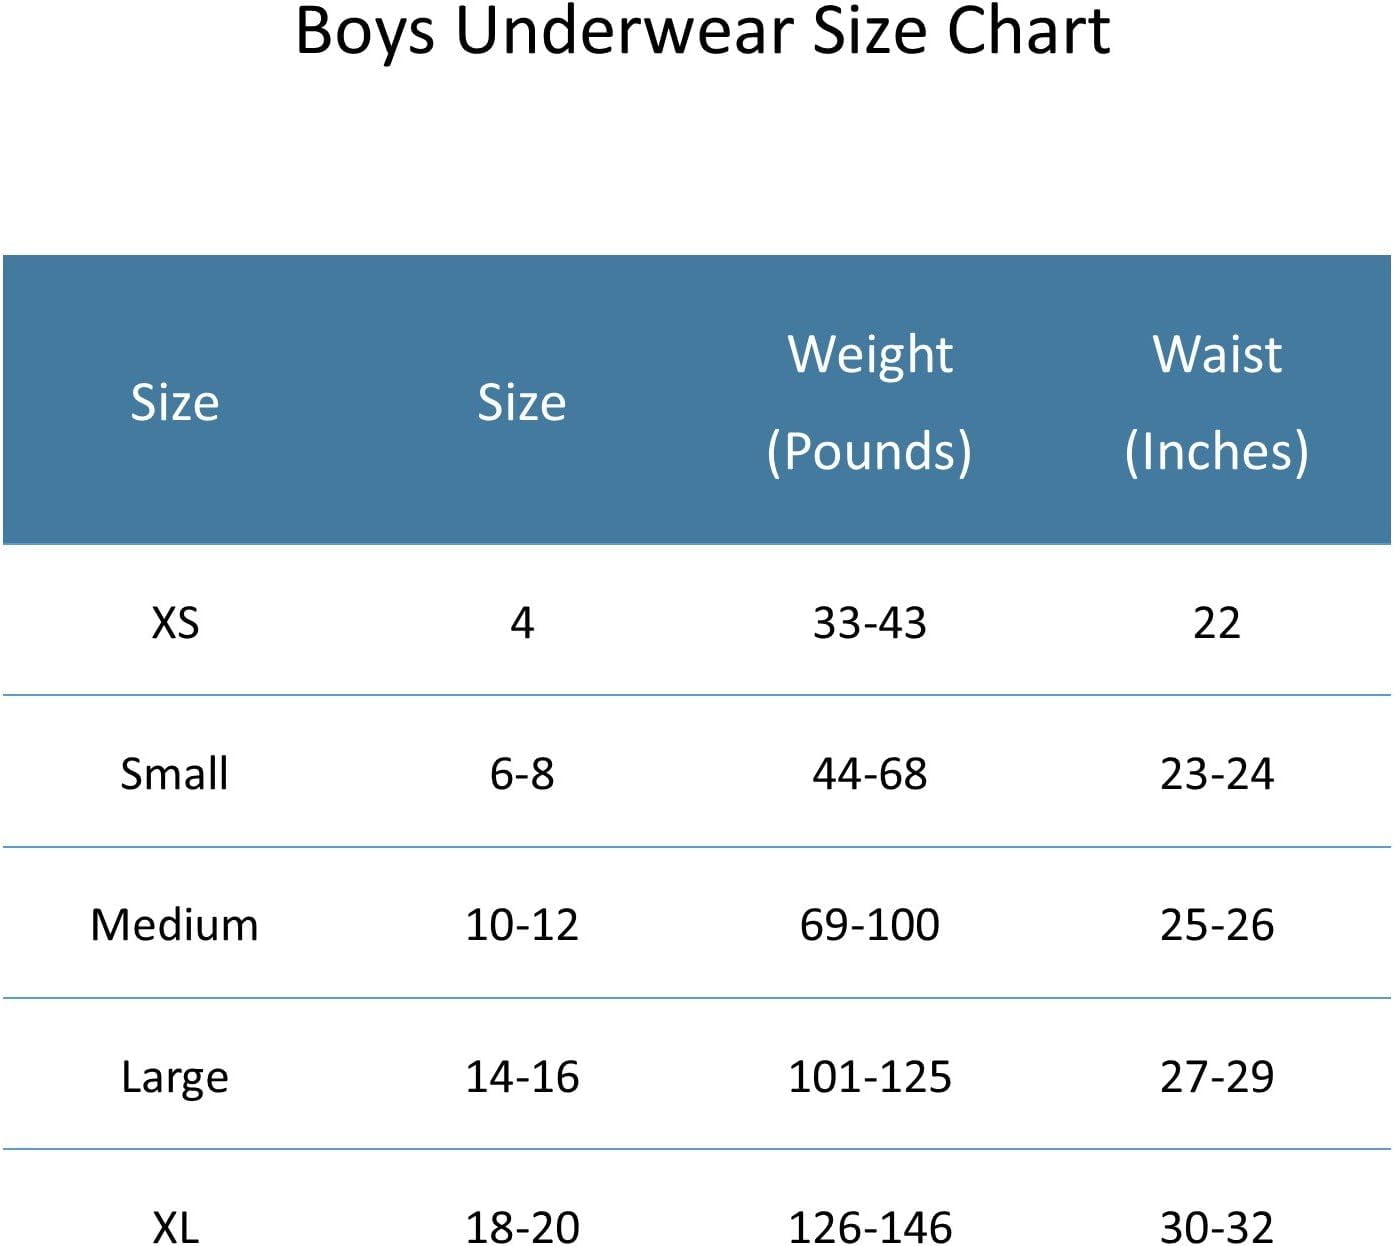 Hanes Boys Underwear, 5 Pack Woven Boxers, Sizes S-XL 